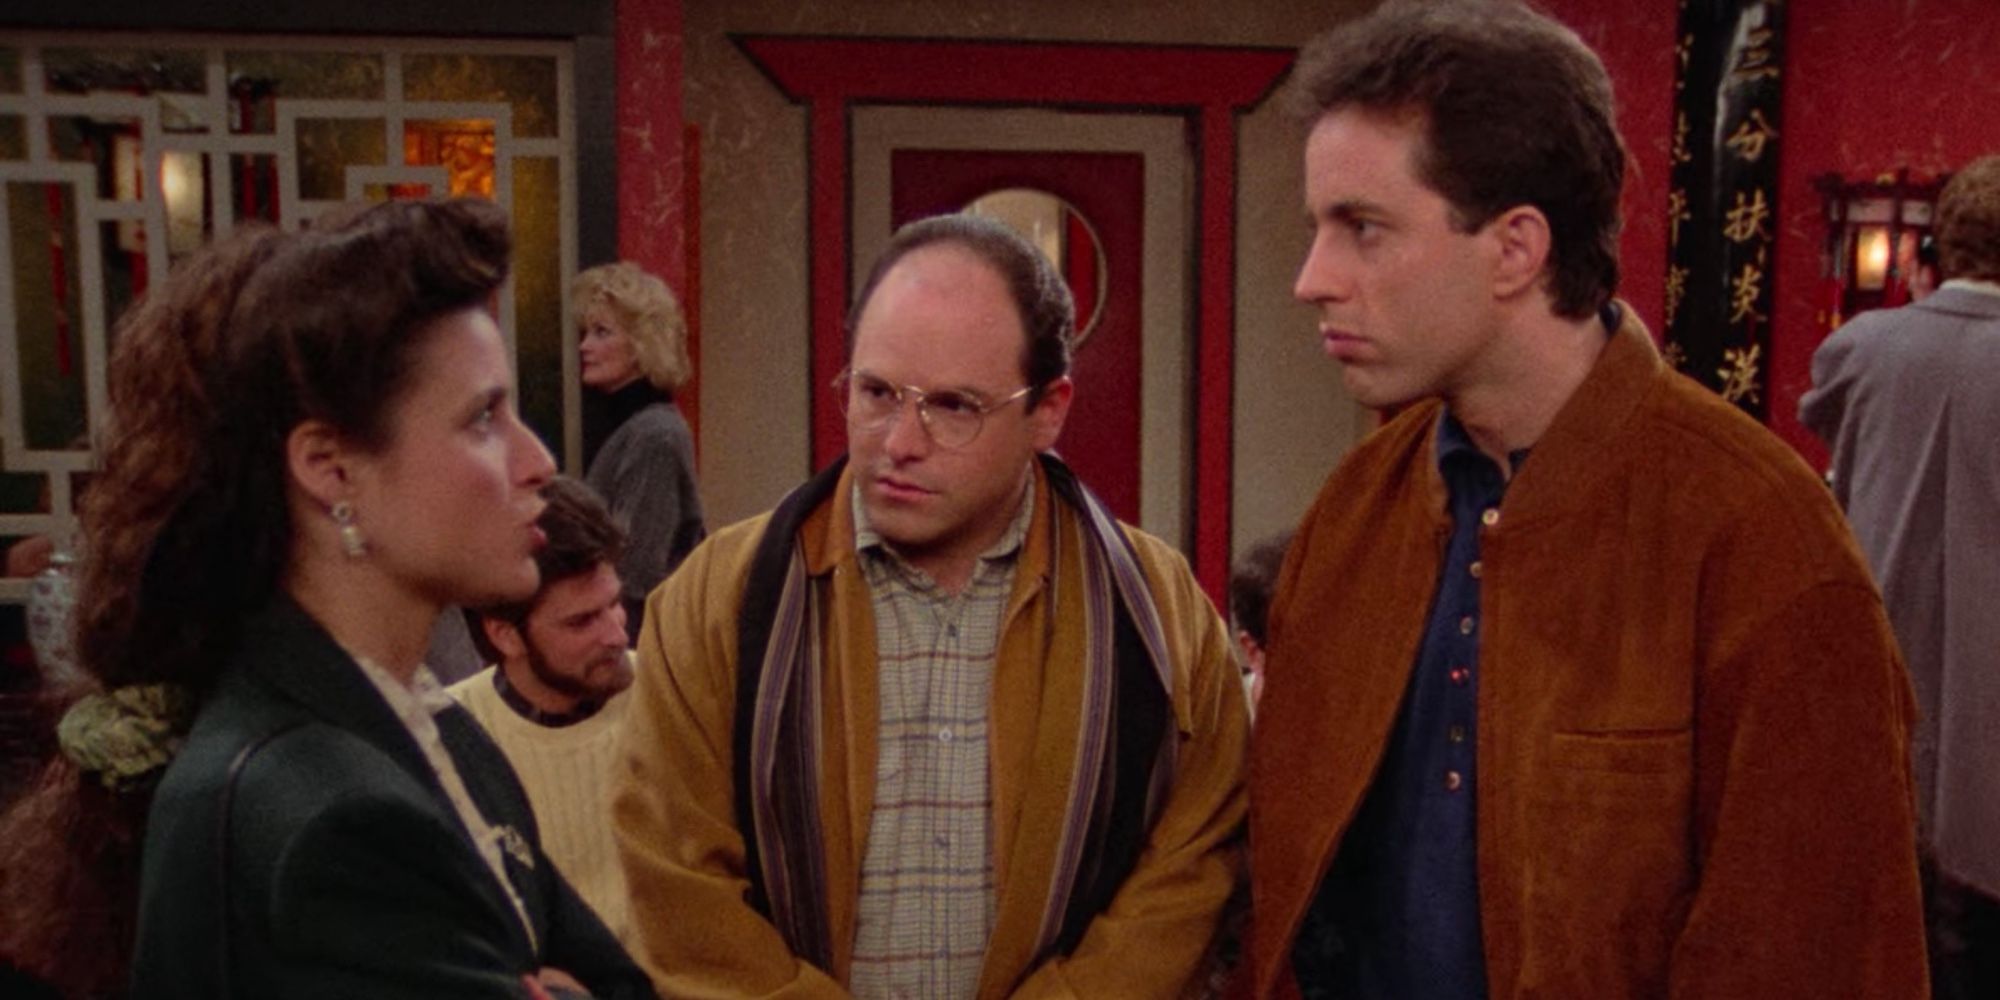 Elaine, George and Jerry in the Seinfeld episode, The Chinese Restaurant